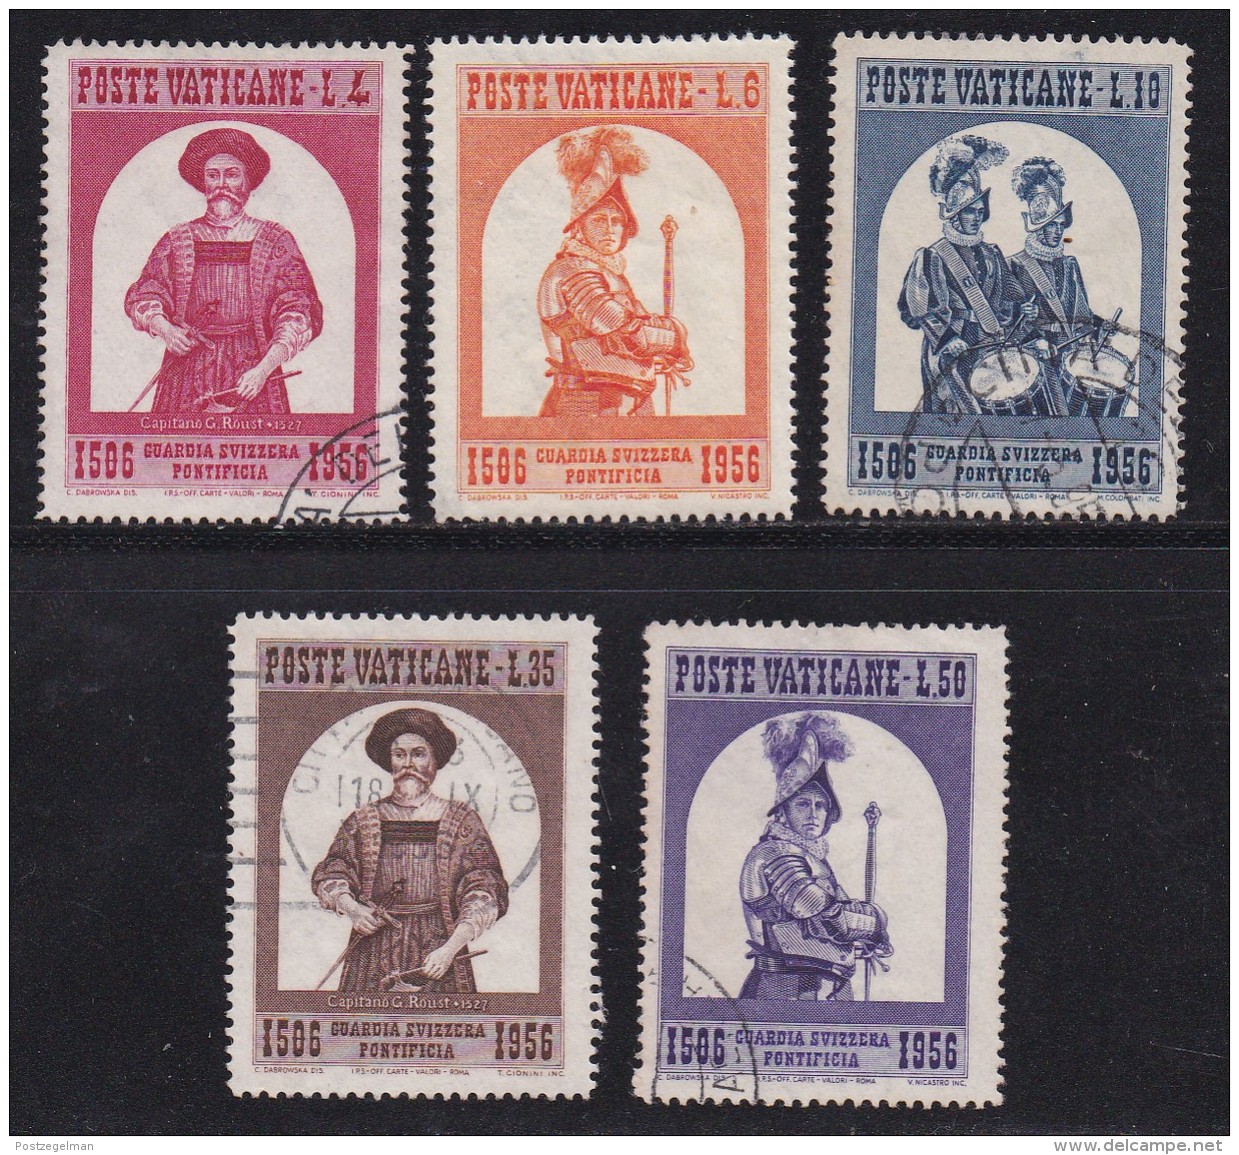 VATICAN, 1956, Mixed Stamp(s), Swiss Guards,  Mi 250=255, #4187,  5 Values Only - Used Stamps